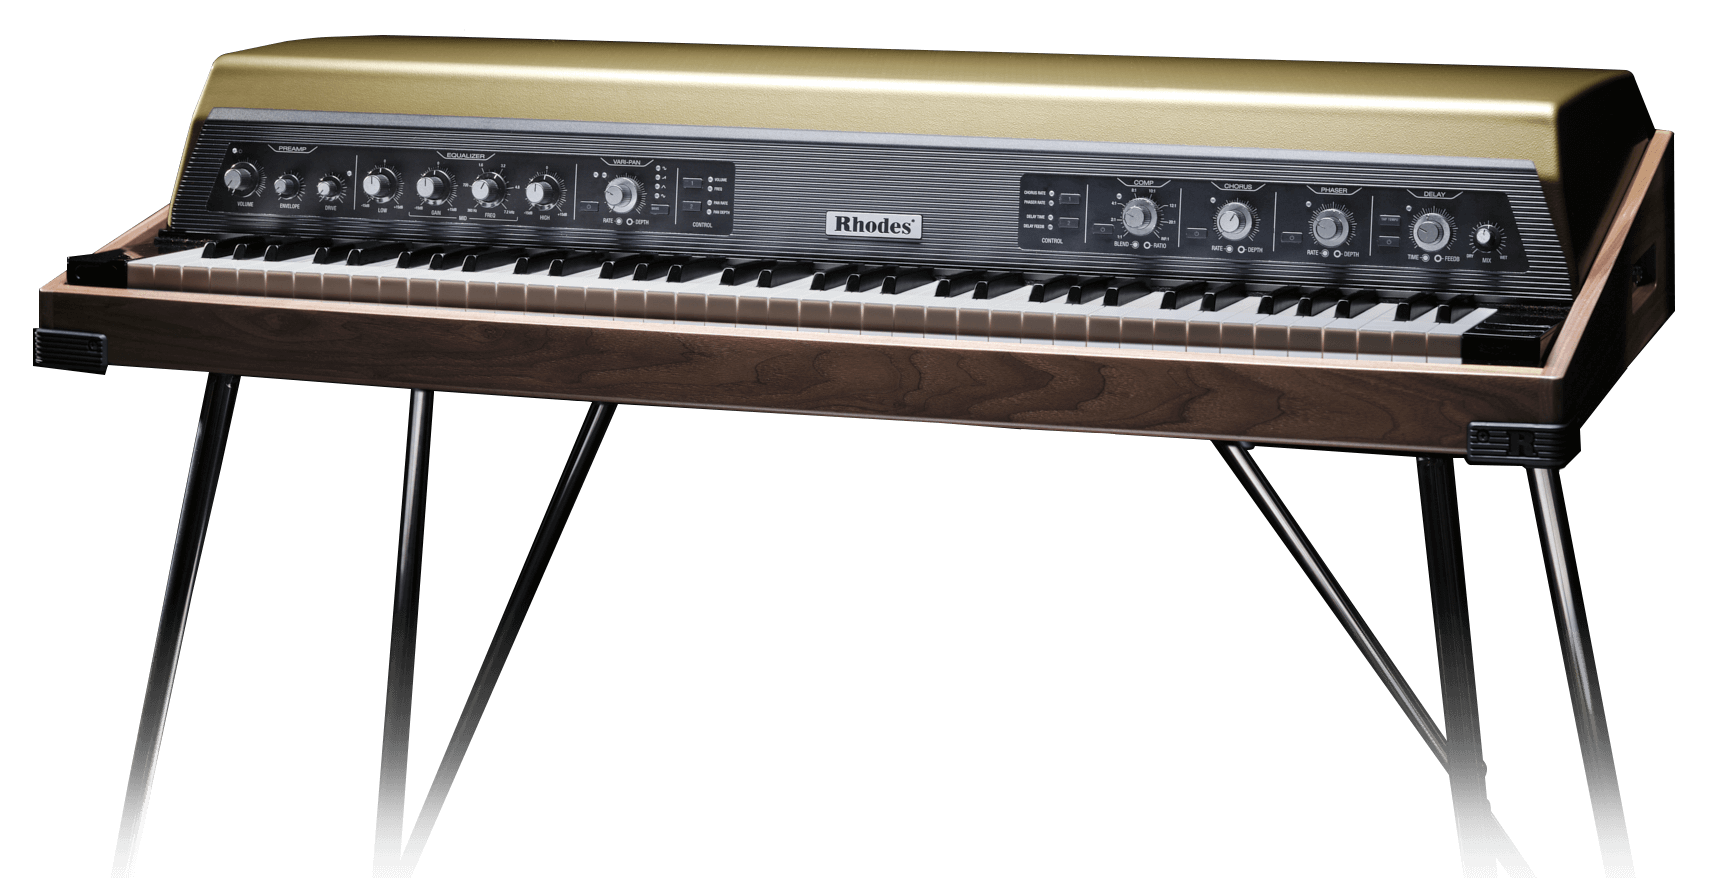 Win a Limited Edition Rhodes MK8 Giveaway